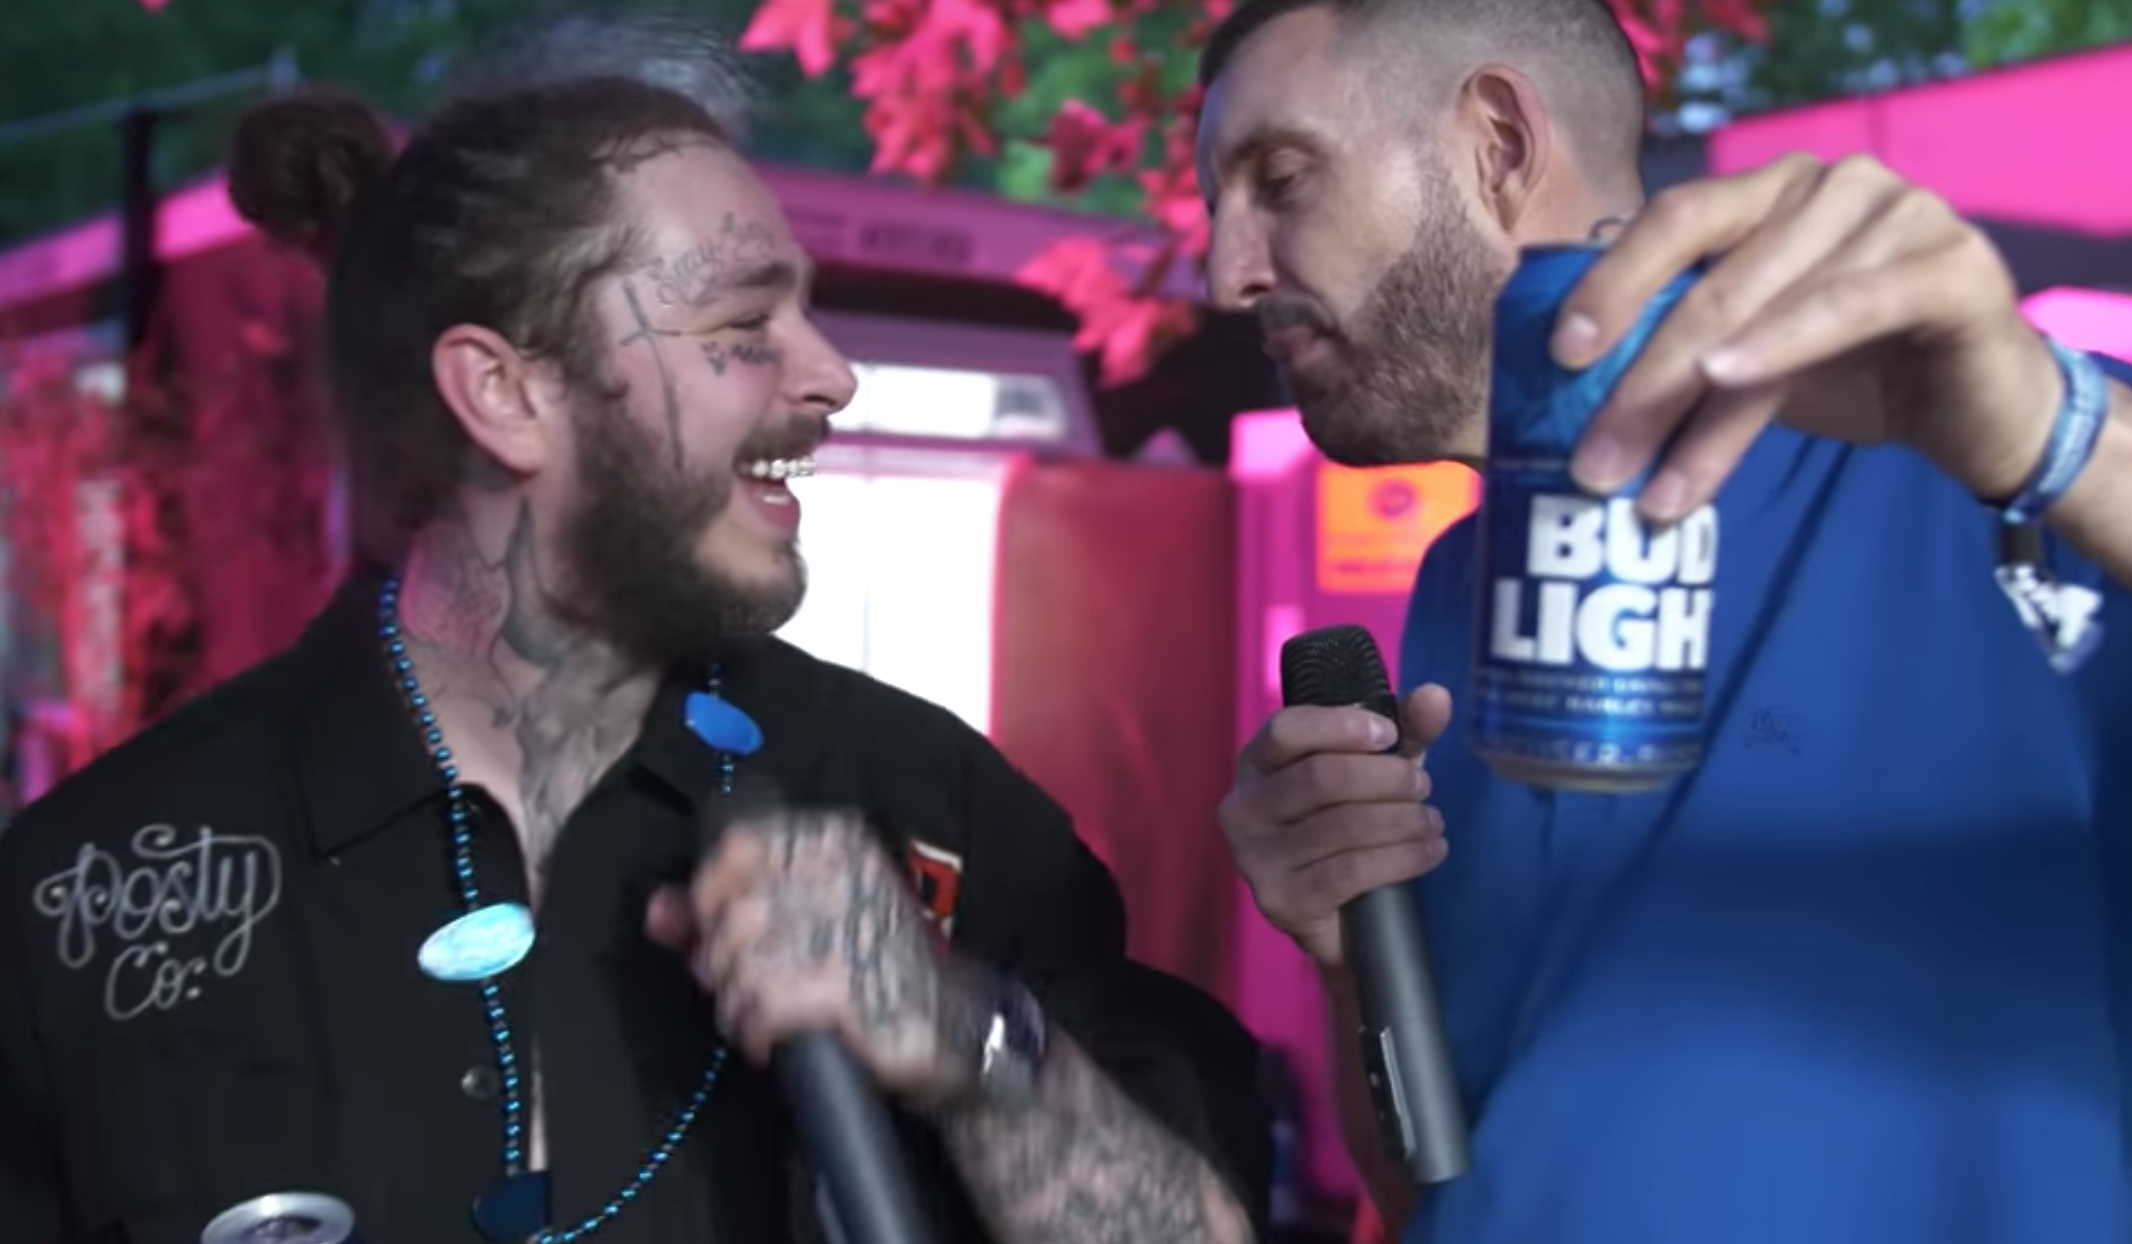 Post Malone just got the words always tired tattooed under his eyes   Music  KISS